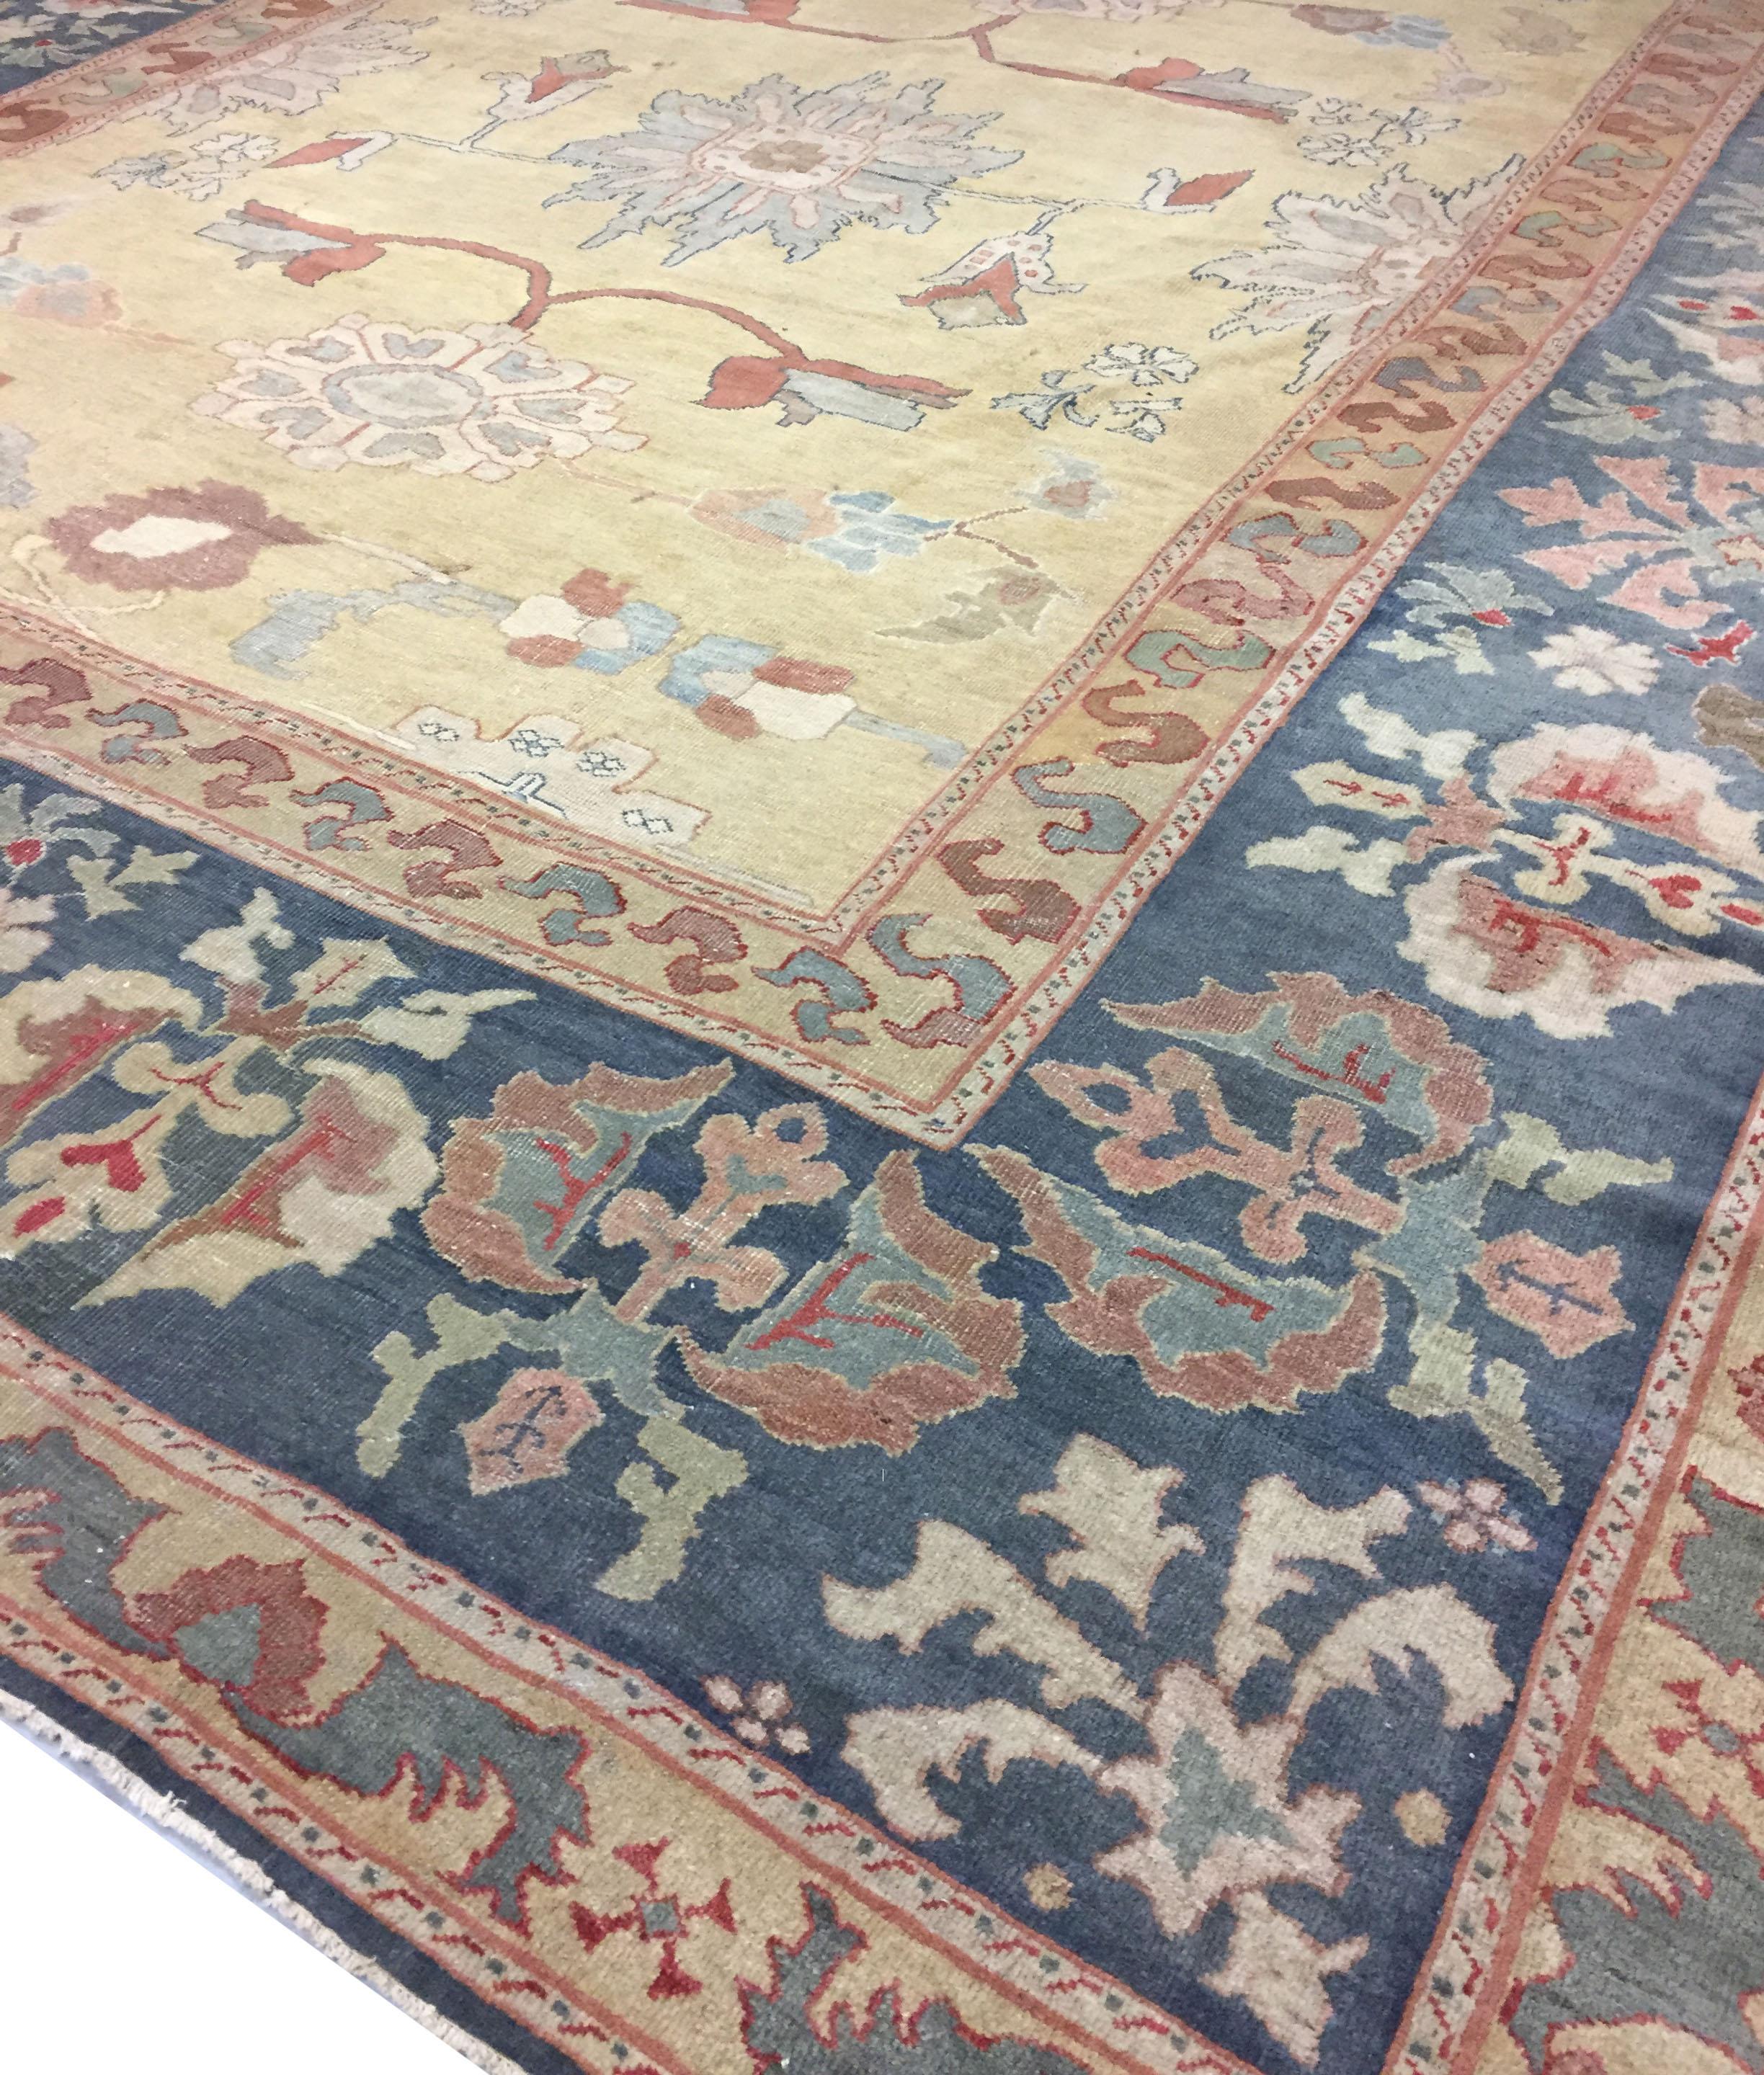 Antique Persian Sultanabad rug, circa 1880. A lovely circa 1880 Persian Sultanabad rug. The open field surrounded by a wide main border gives a feeling of both strength yet blended with the softness of the main ground to create a perfect symmetry.